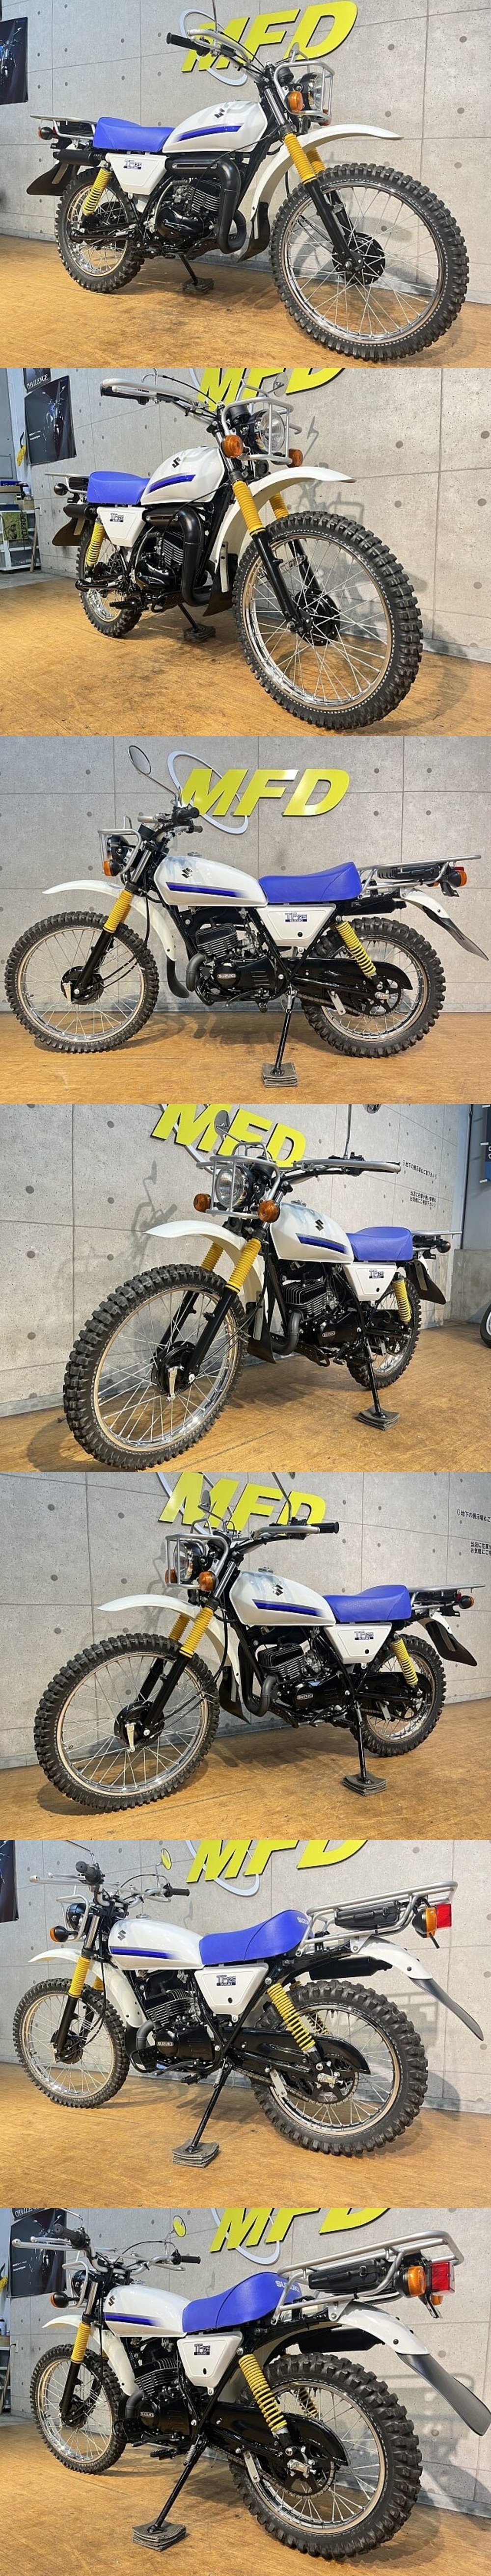 TF125 domestic not yet sale vehicle 2 stroke : Real Yahoo auction 